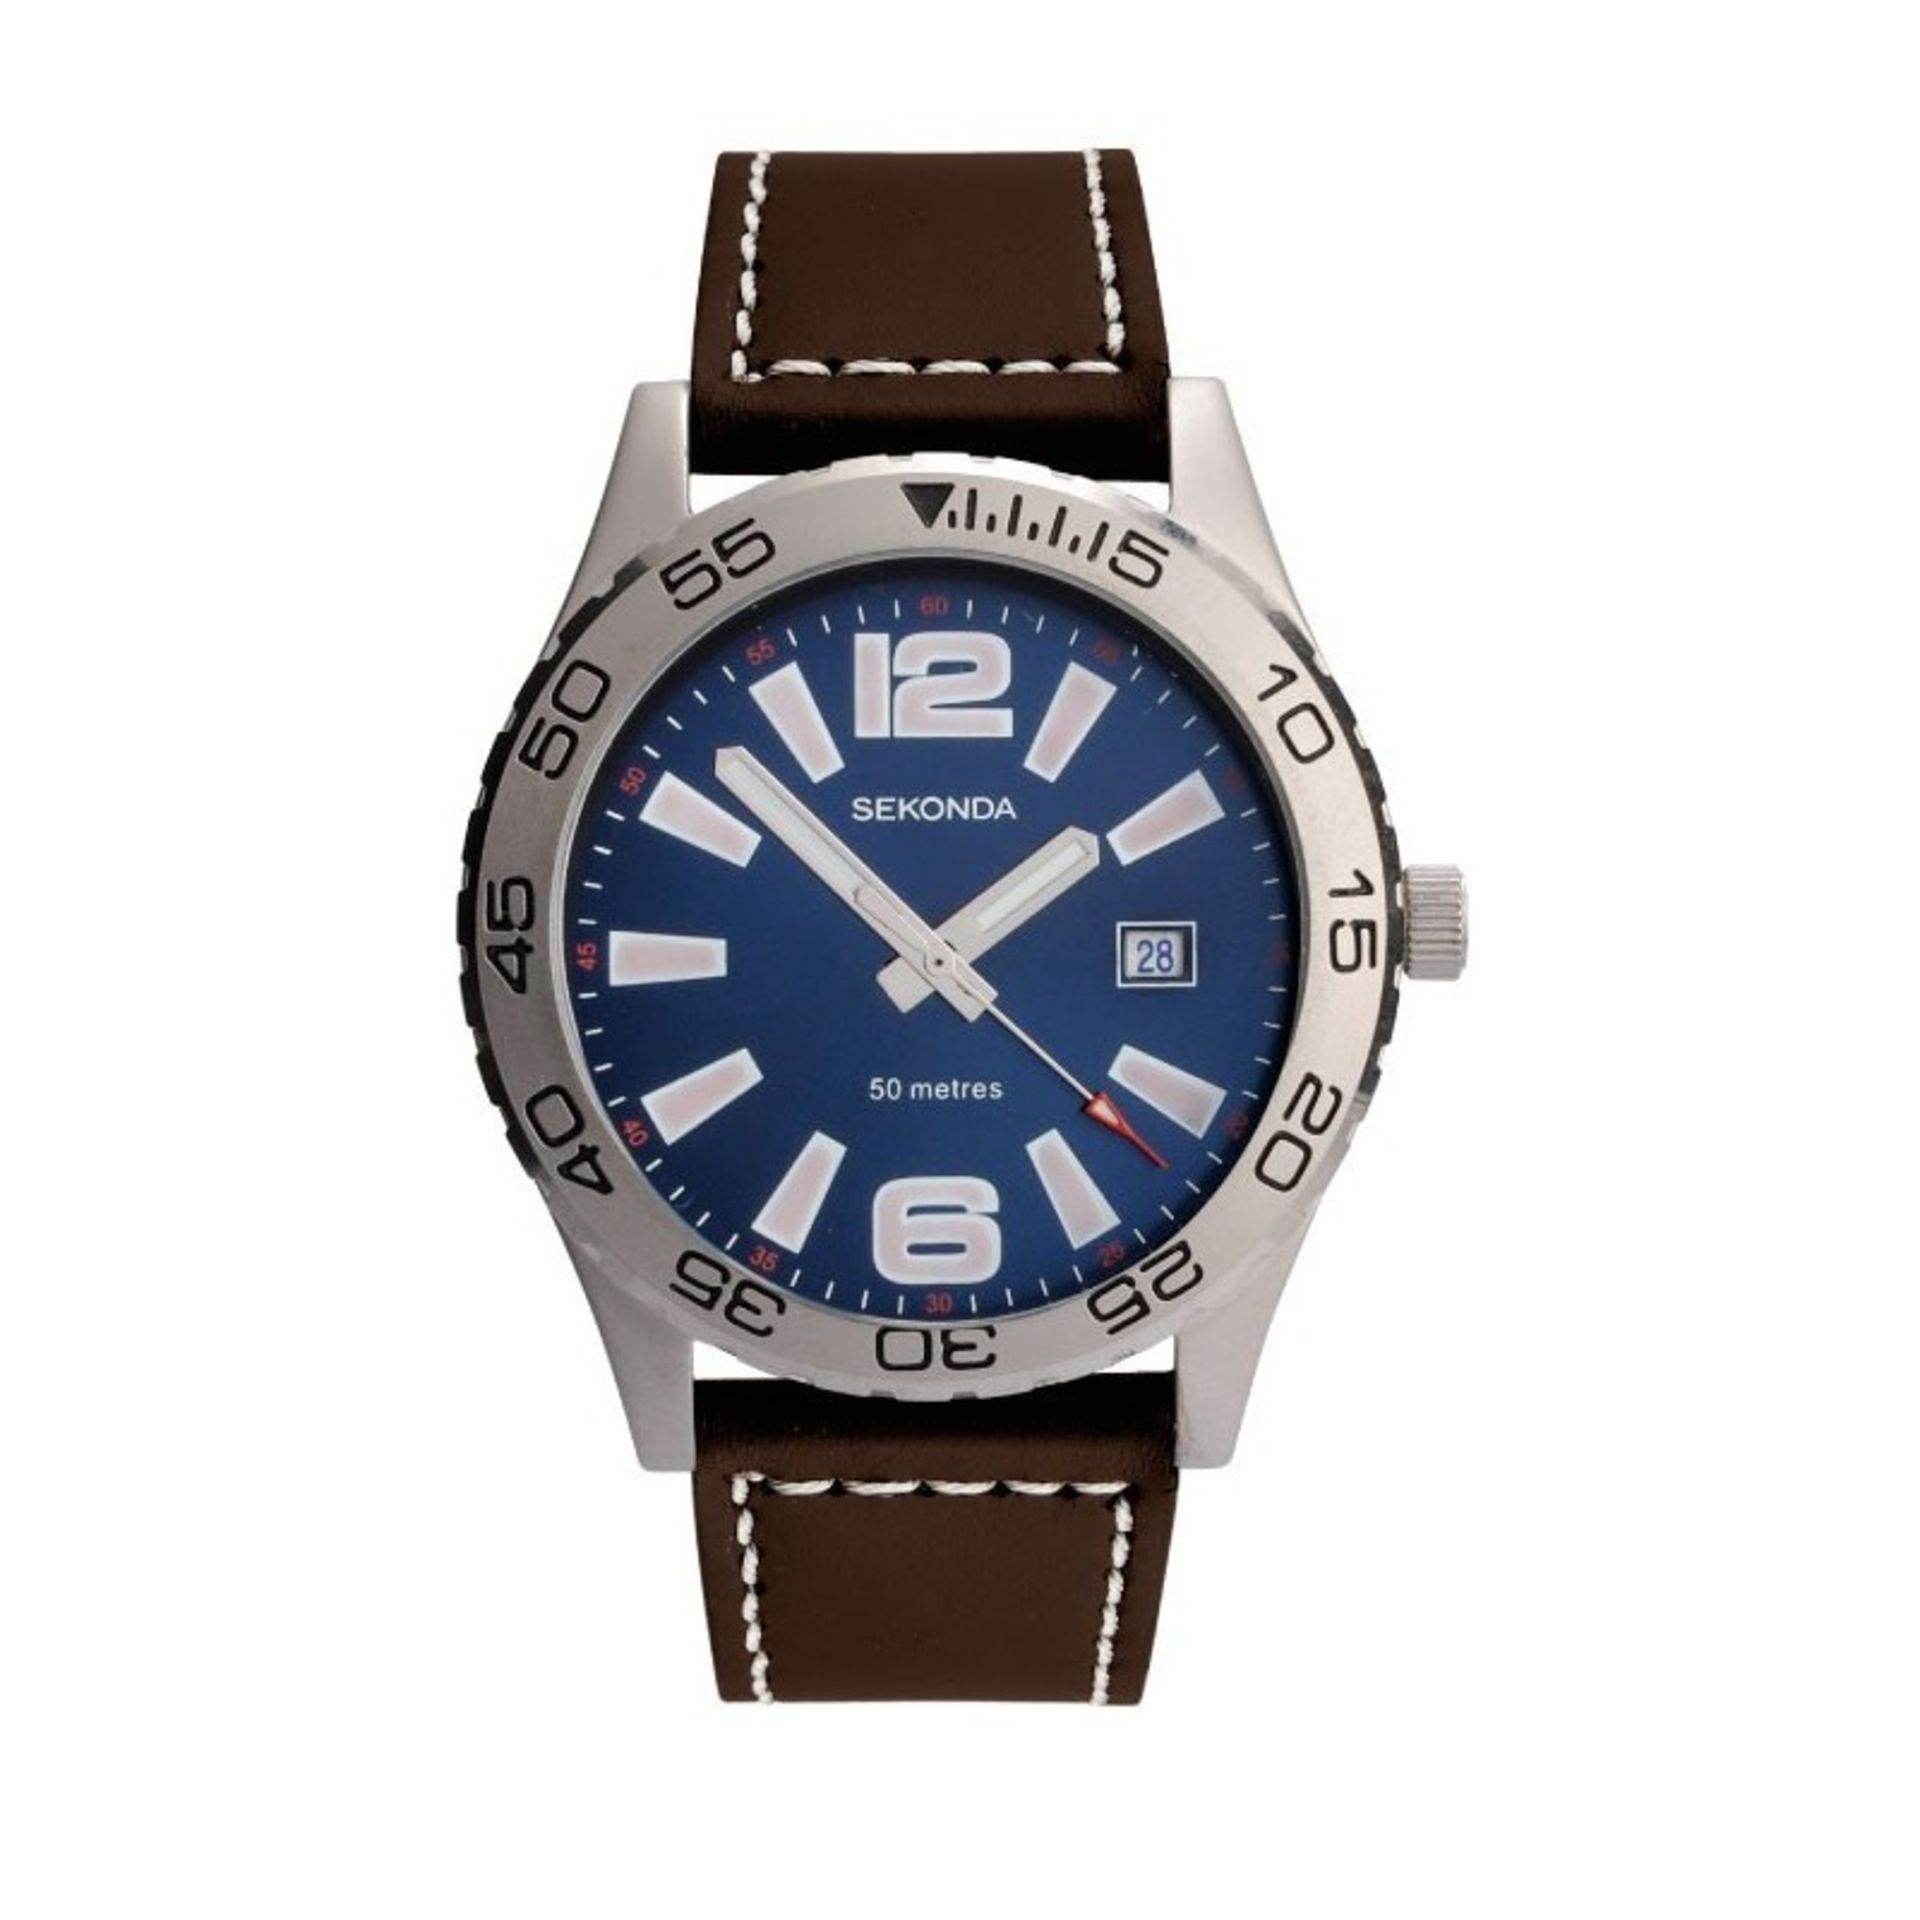 V Brand New Gents Sekonda Sports (50 Metres) with Date and Leather Strap - ISP £25.00 (WatchShop)